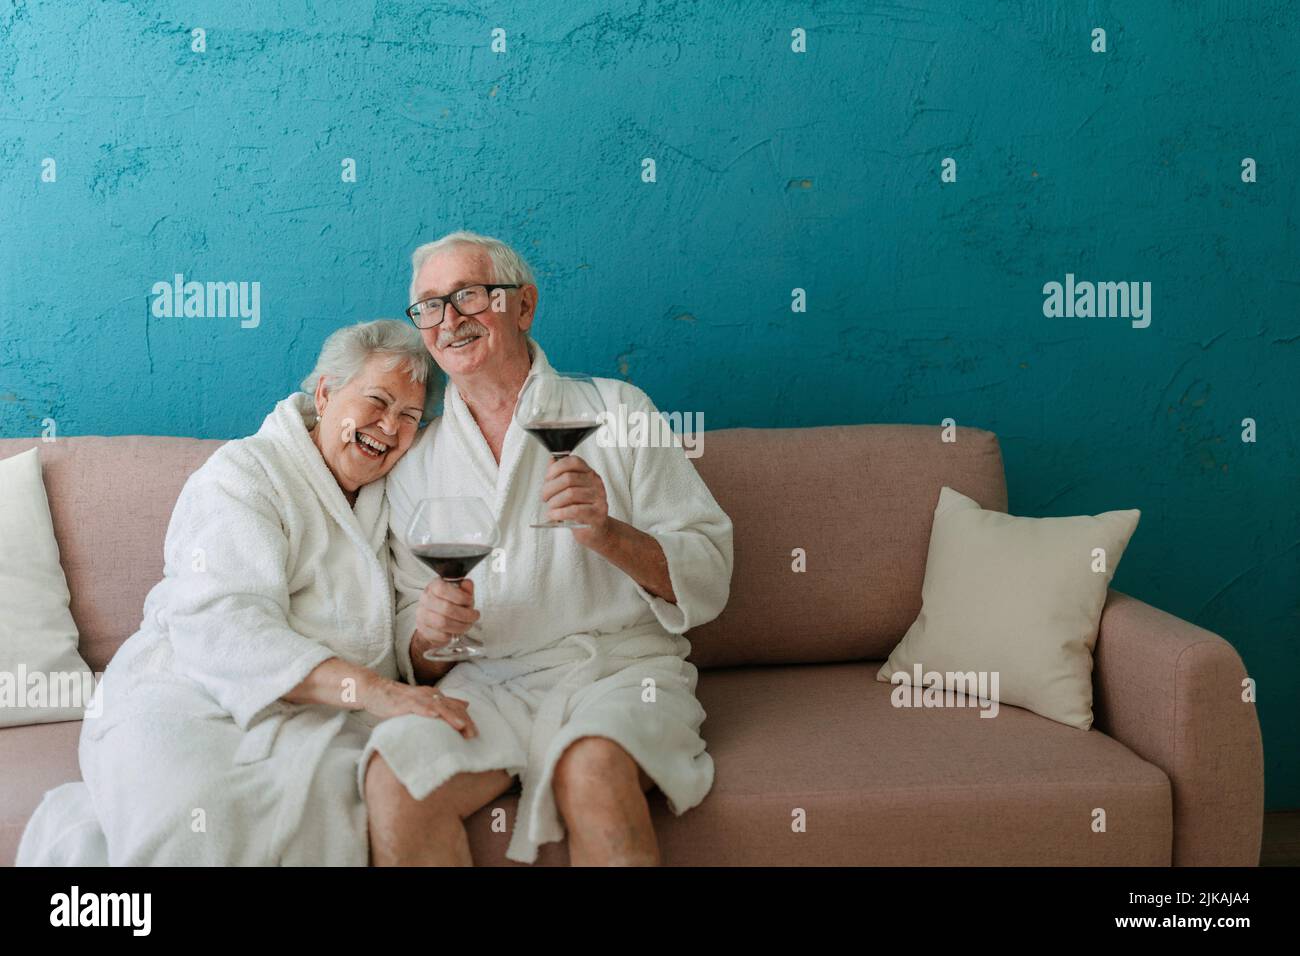 Happy senior couple sitting together in bathrobe on sofa with glass of wine, having nice time at home. Stock Photo